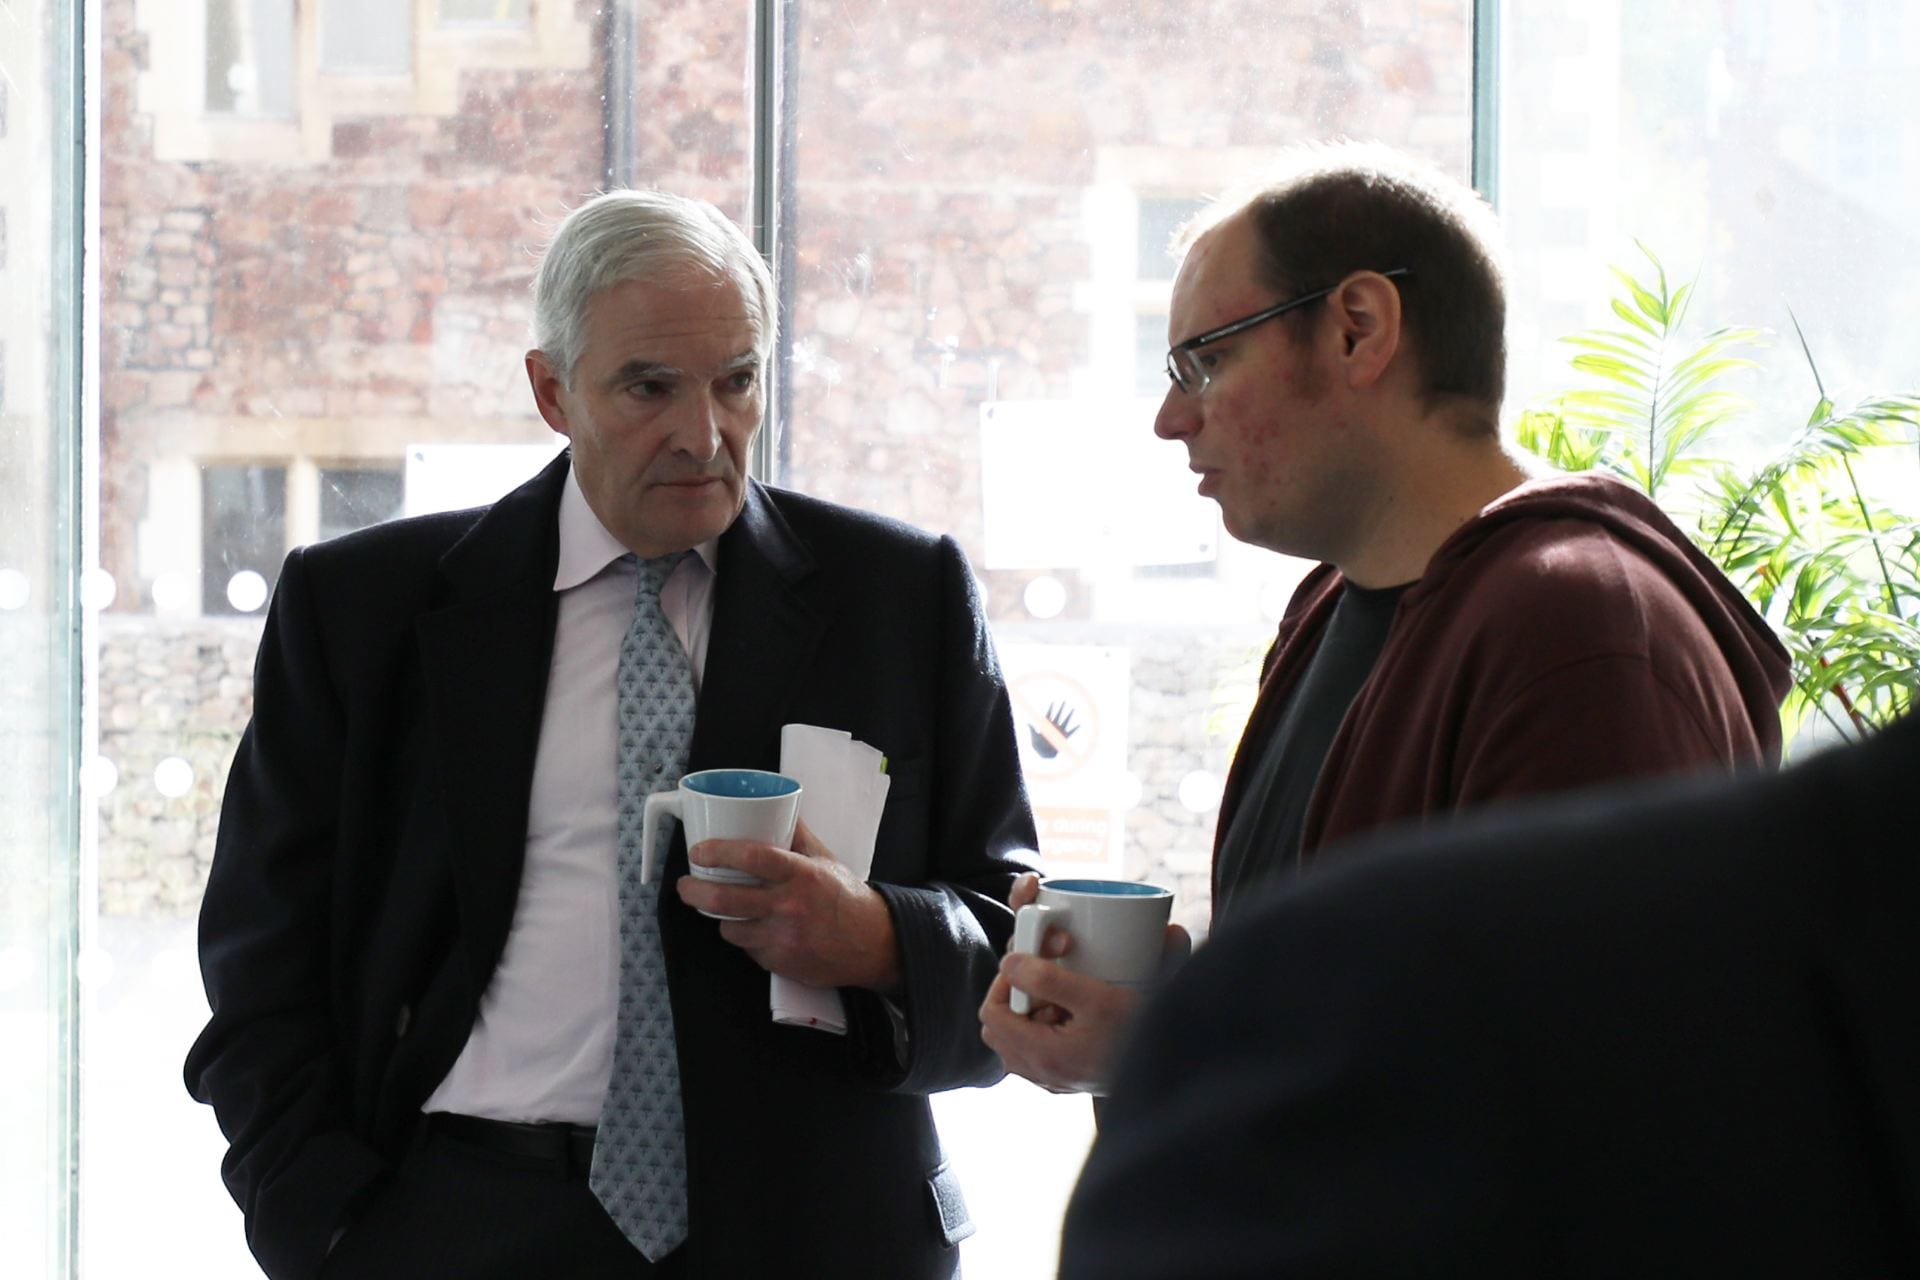 Lord Henley gains insights about the work of the Bristol BioDesign team